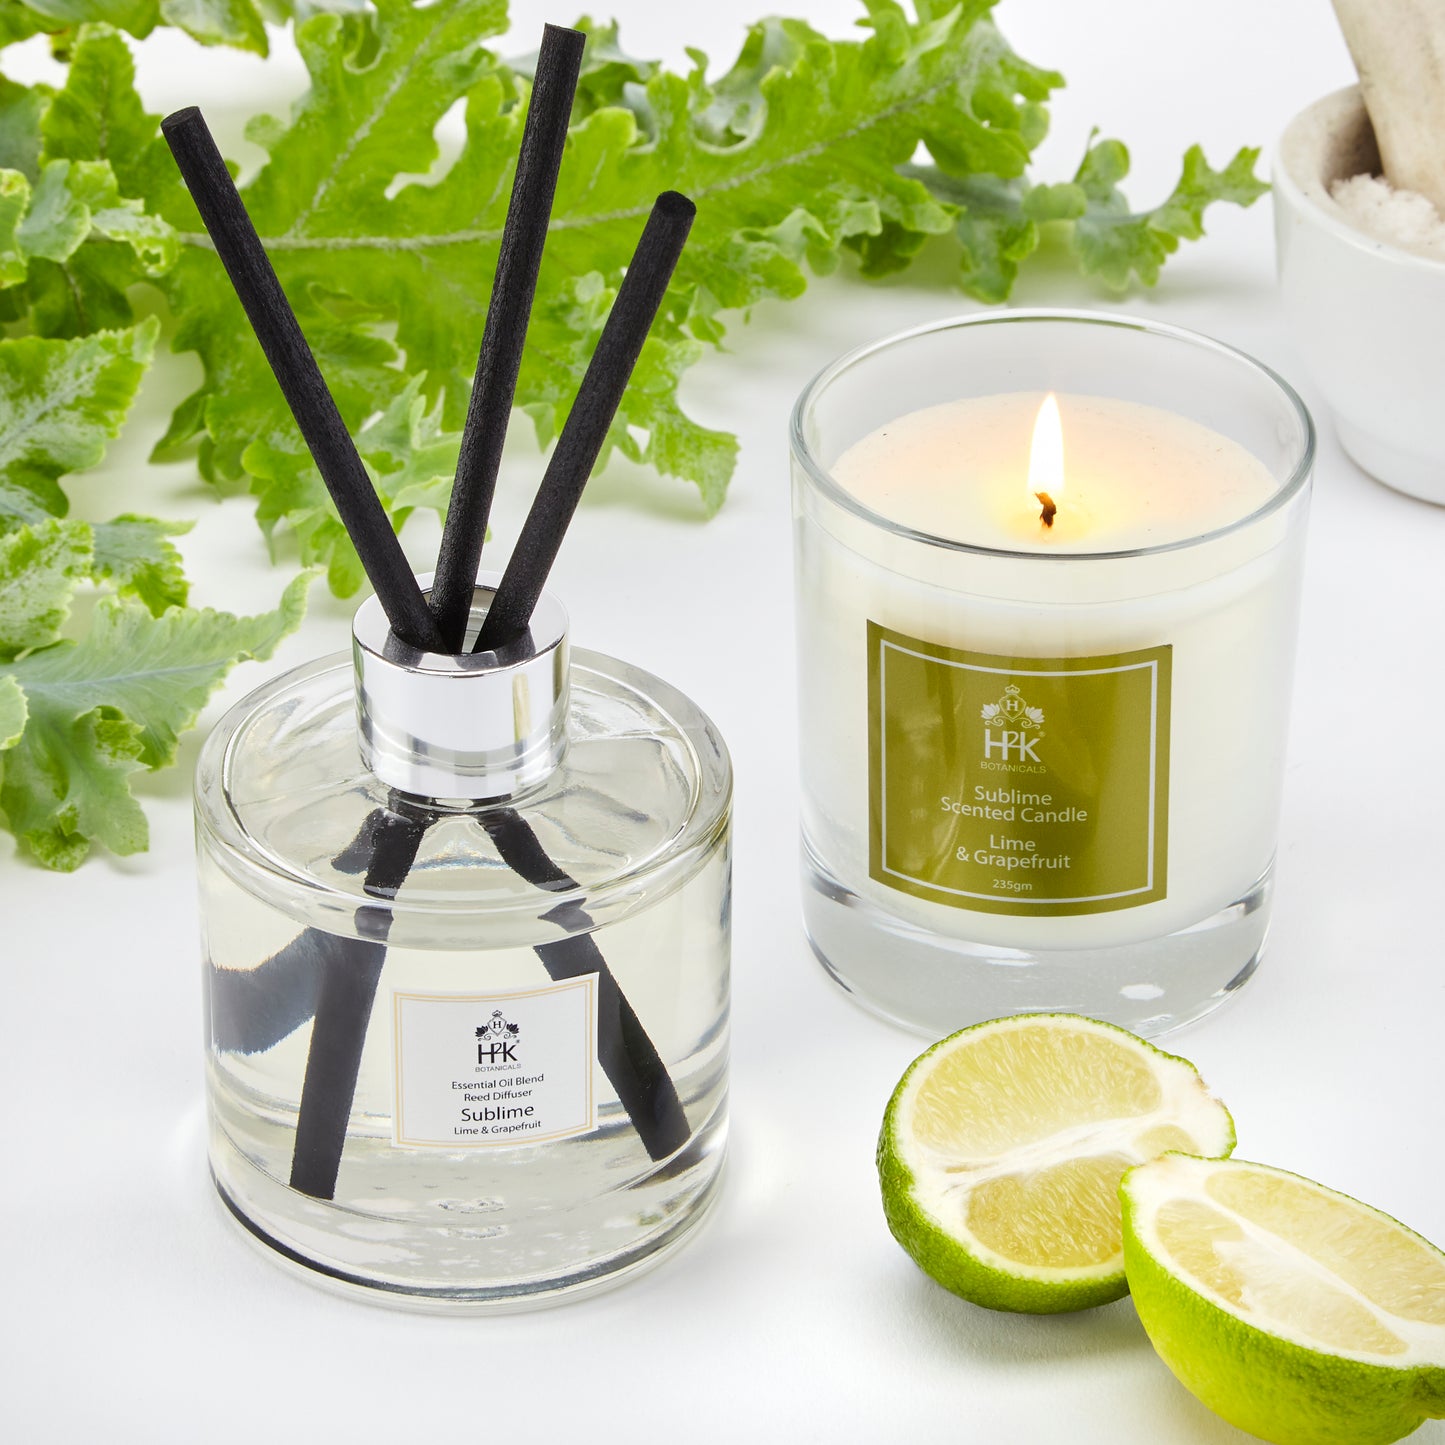 Grapefruit and Lime Gift Reed Diffuser & Candle